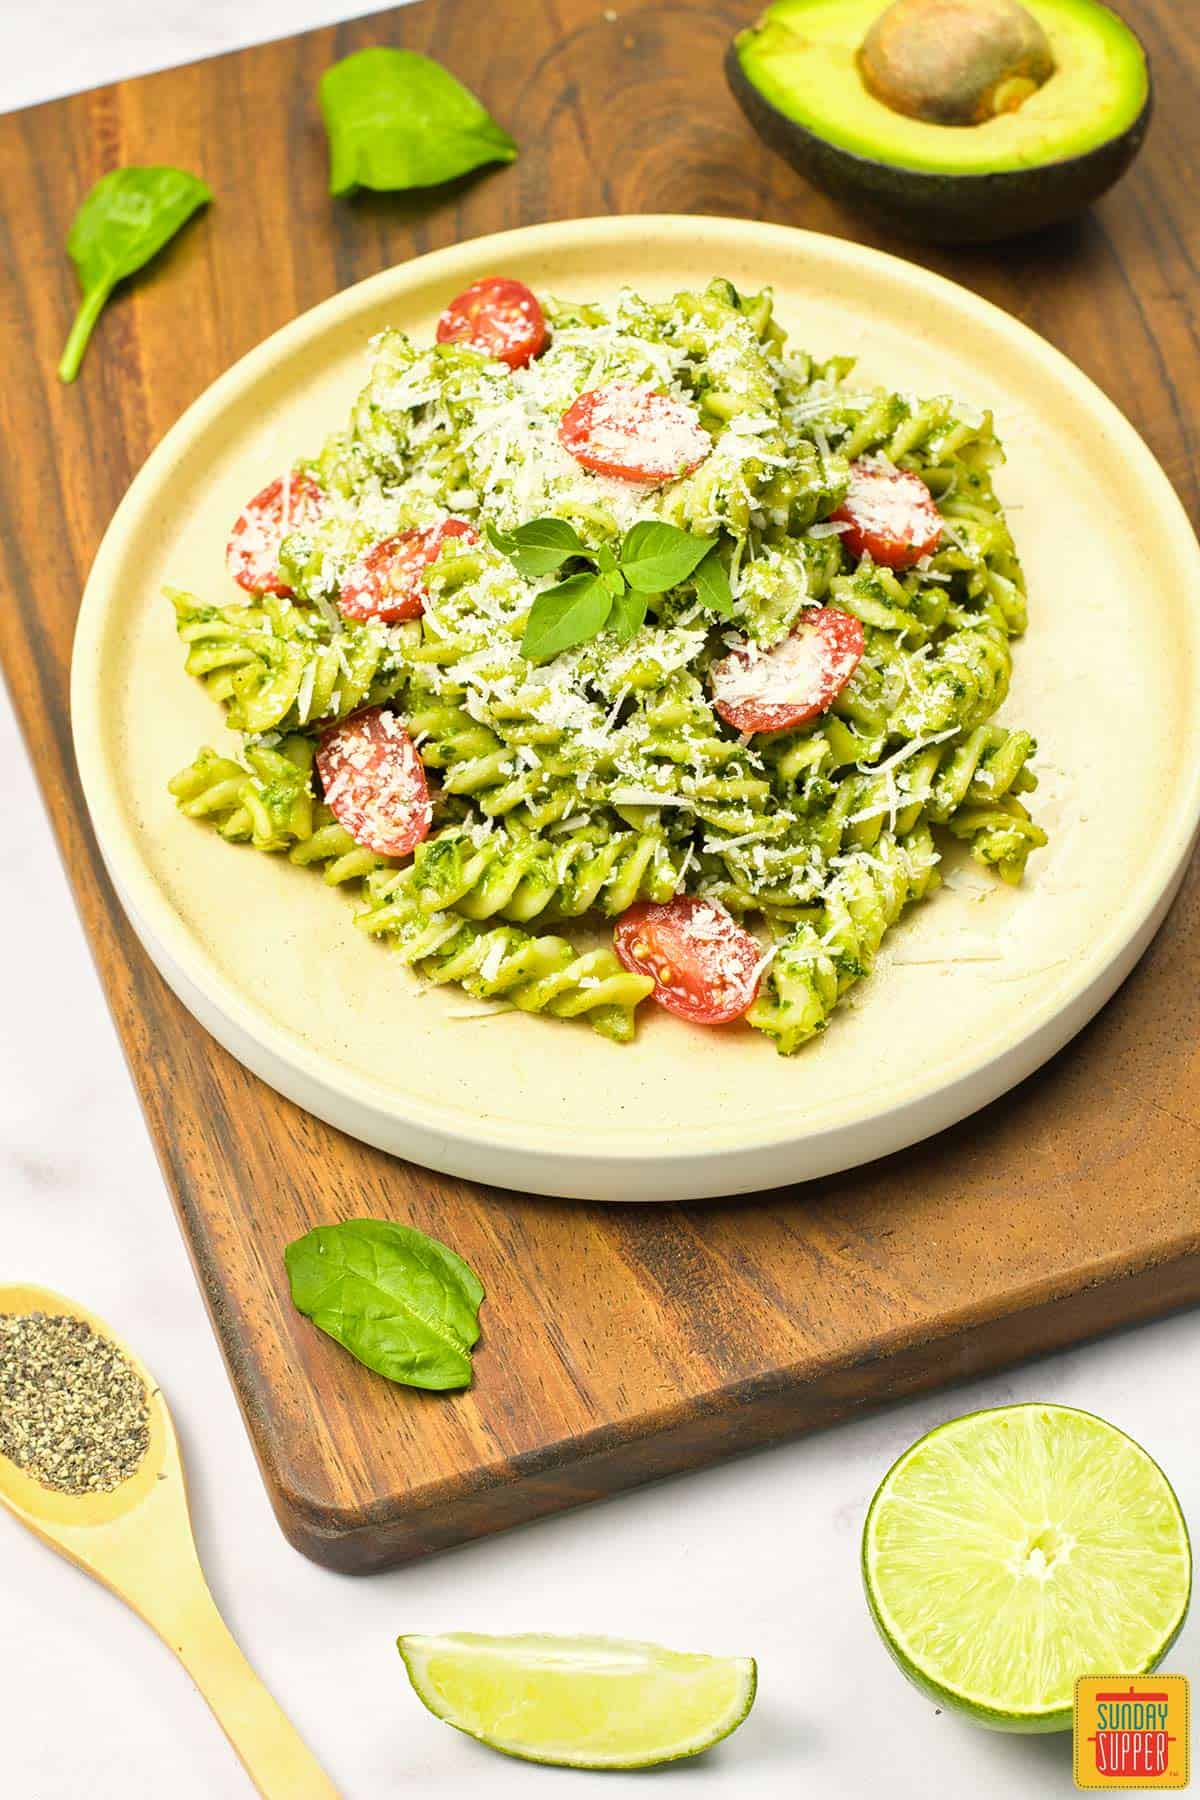 a completed plate of avocado pasta with basil, tomato and parmesan garnish